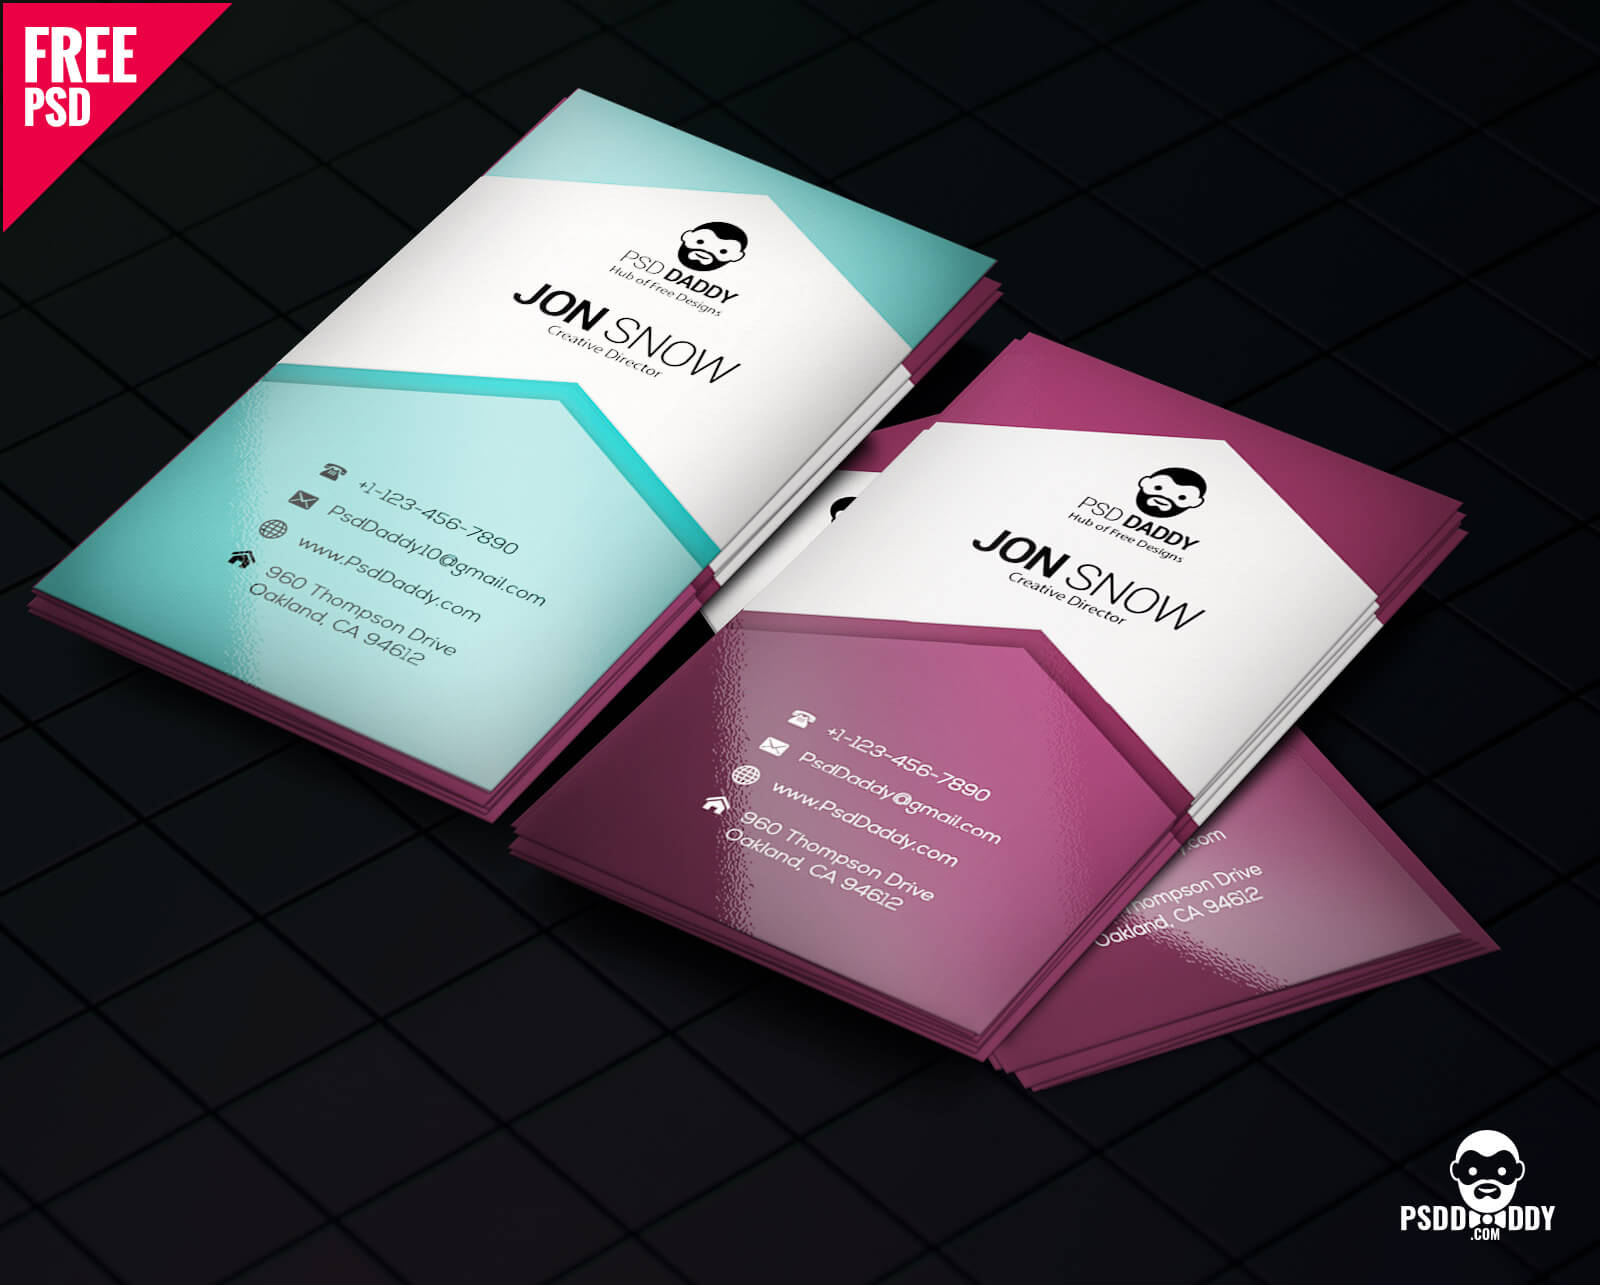 Download]Creative Business Card Psd Free | Psddaddy For Free Psd Visiting Card Templates Download